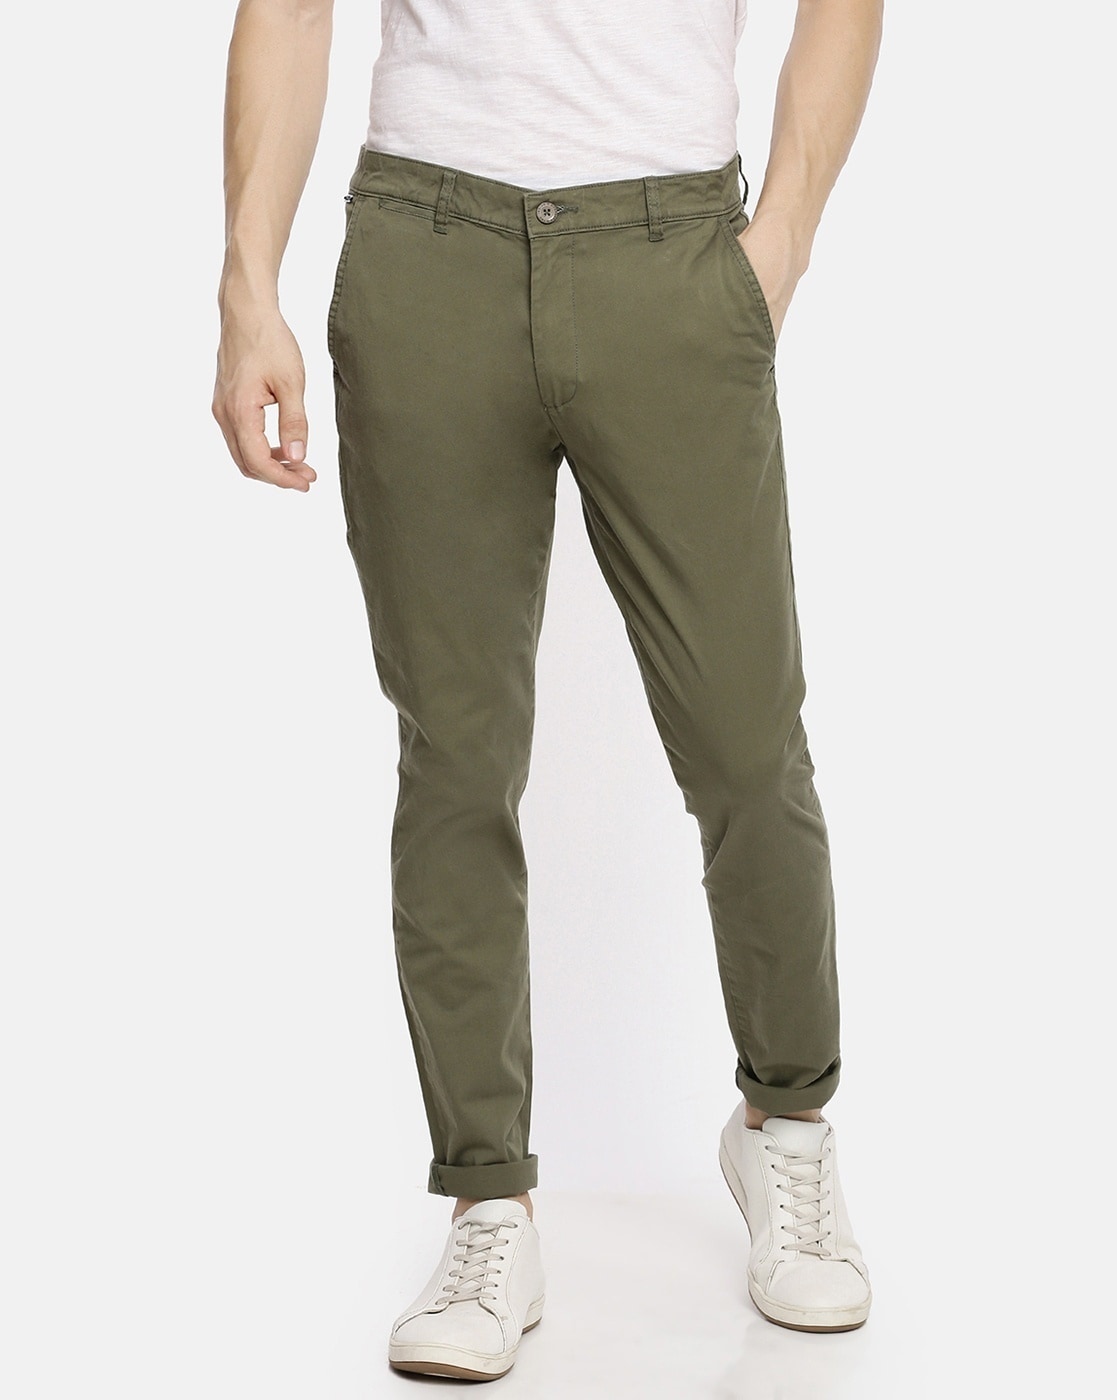 Whats the difference between 5pocket casual pants and other types of pants   Proper Cloth Help